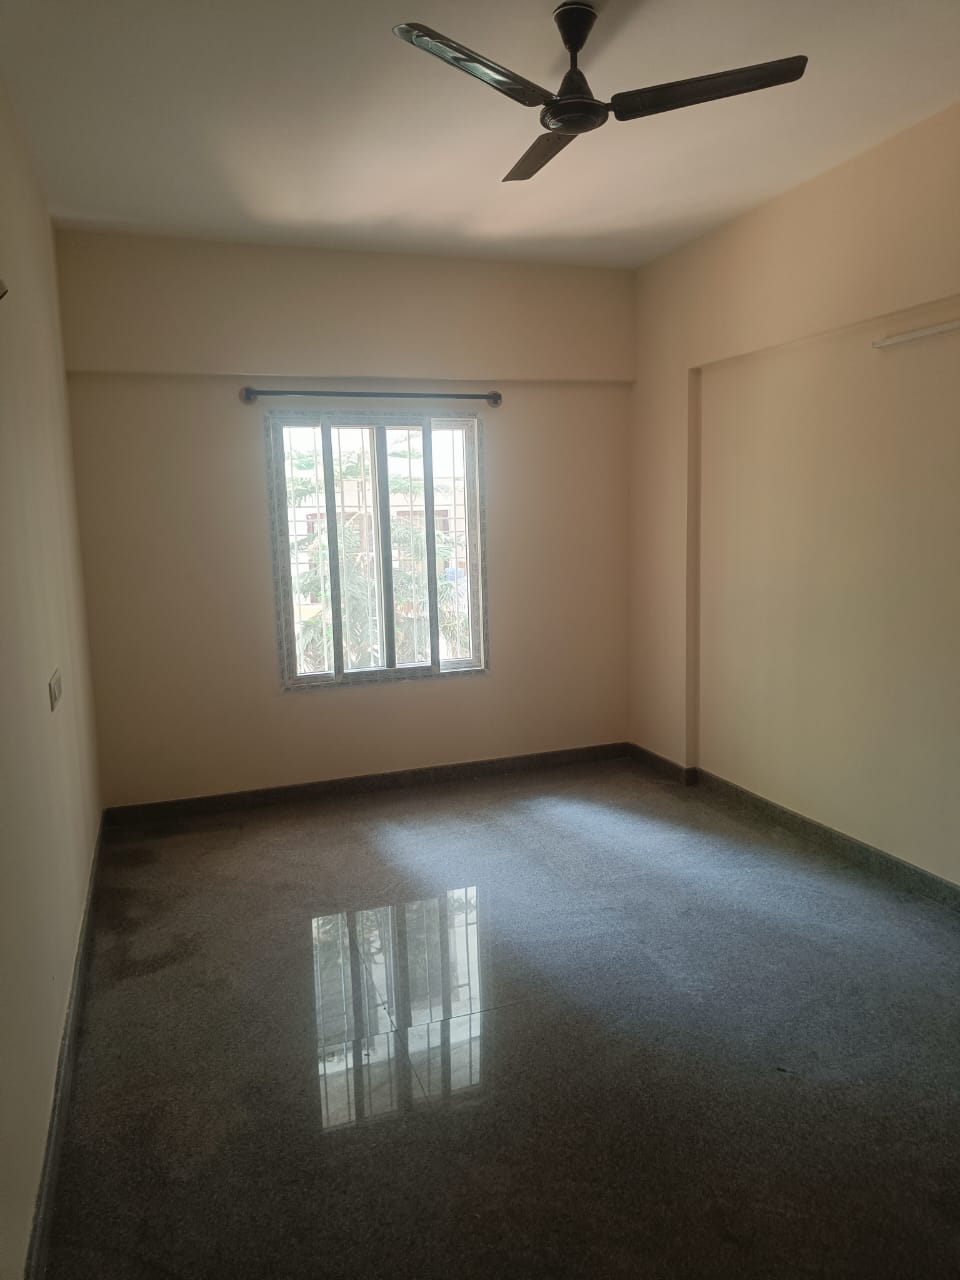 3 BHK Independent House for Lease Only at JAML2 - 4148 in Mahalakshmipuram